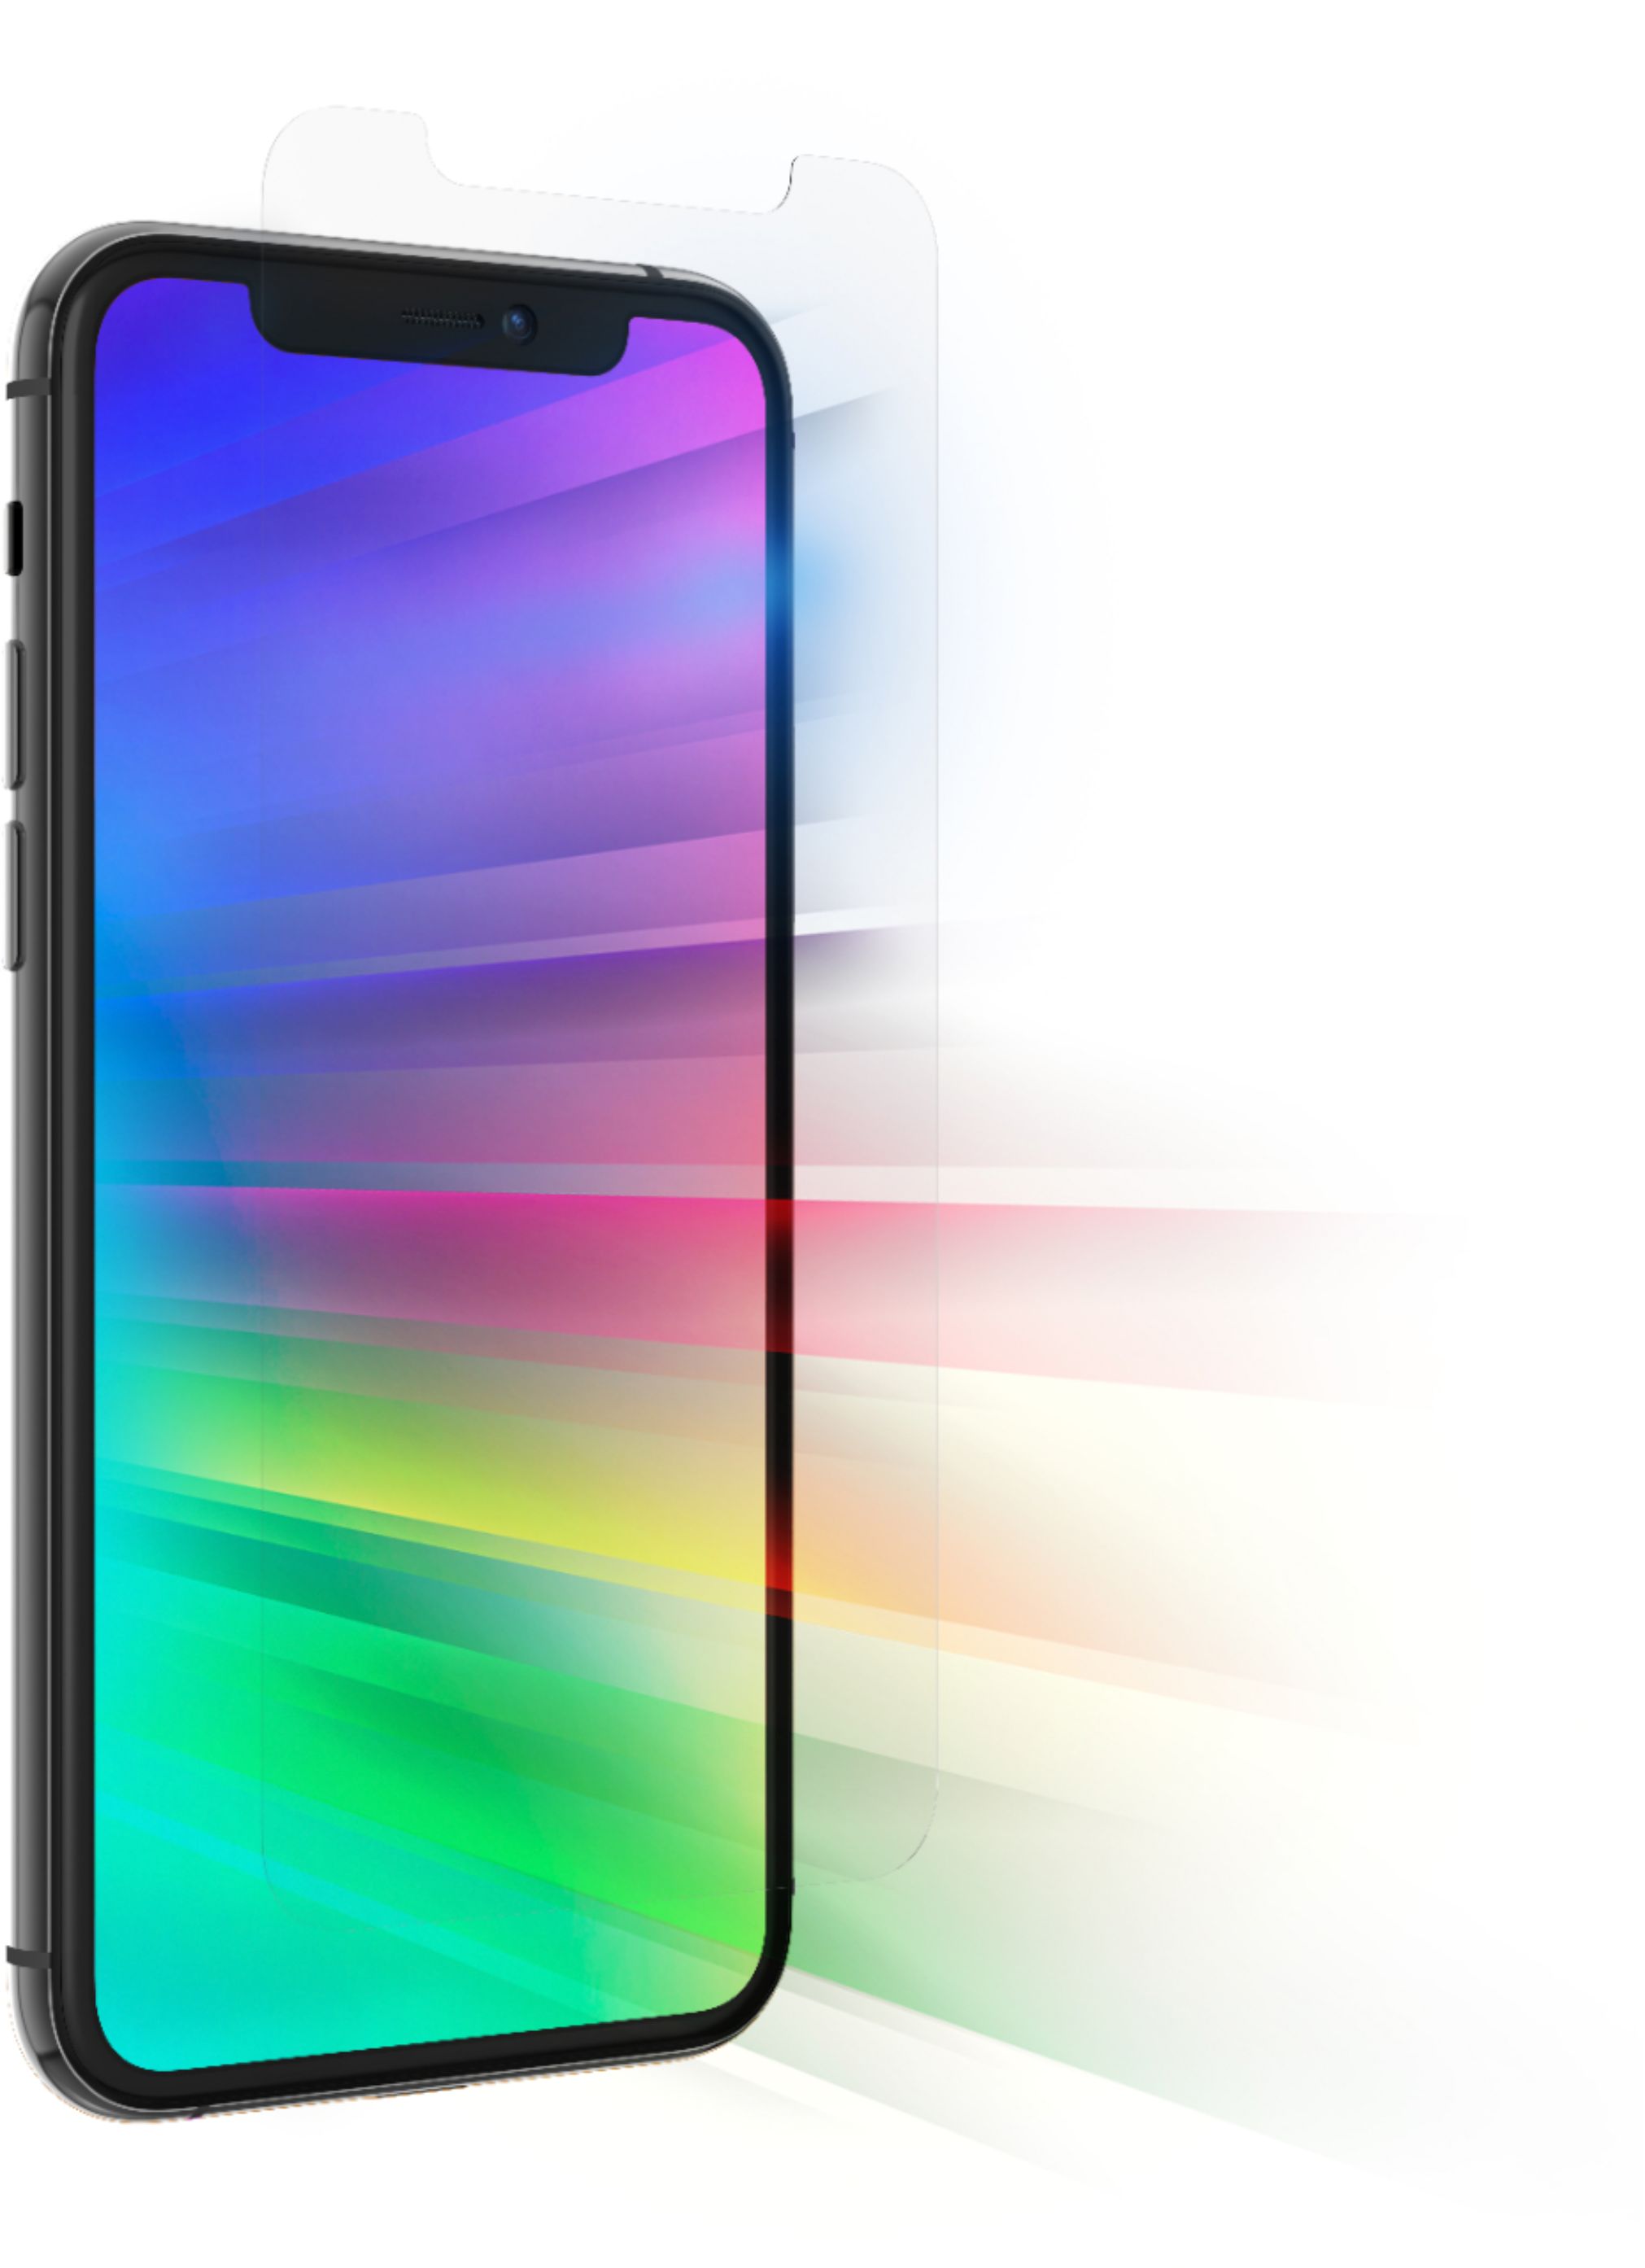 Angle View: ZAGG - InvisibleShield® Glass Elite VisionGuard+ Blue Light Filtering Screen Protector for Apple iPhone 11/XR